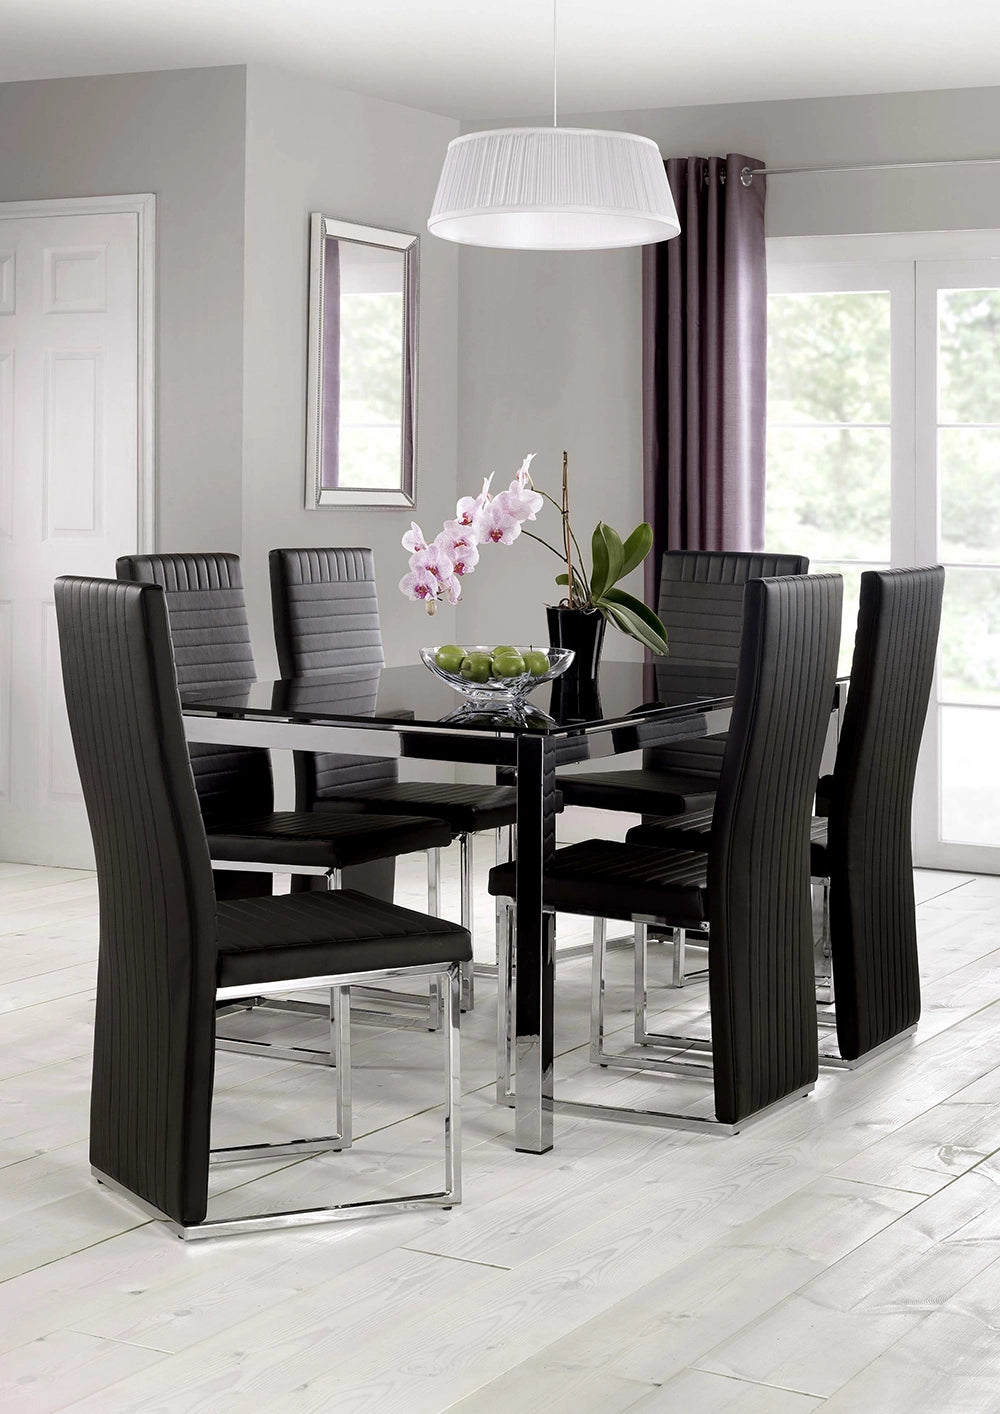 Poppy Glass Dining Table with Black Upholstered Chairs and Ceiling Lamp in Dining Setting